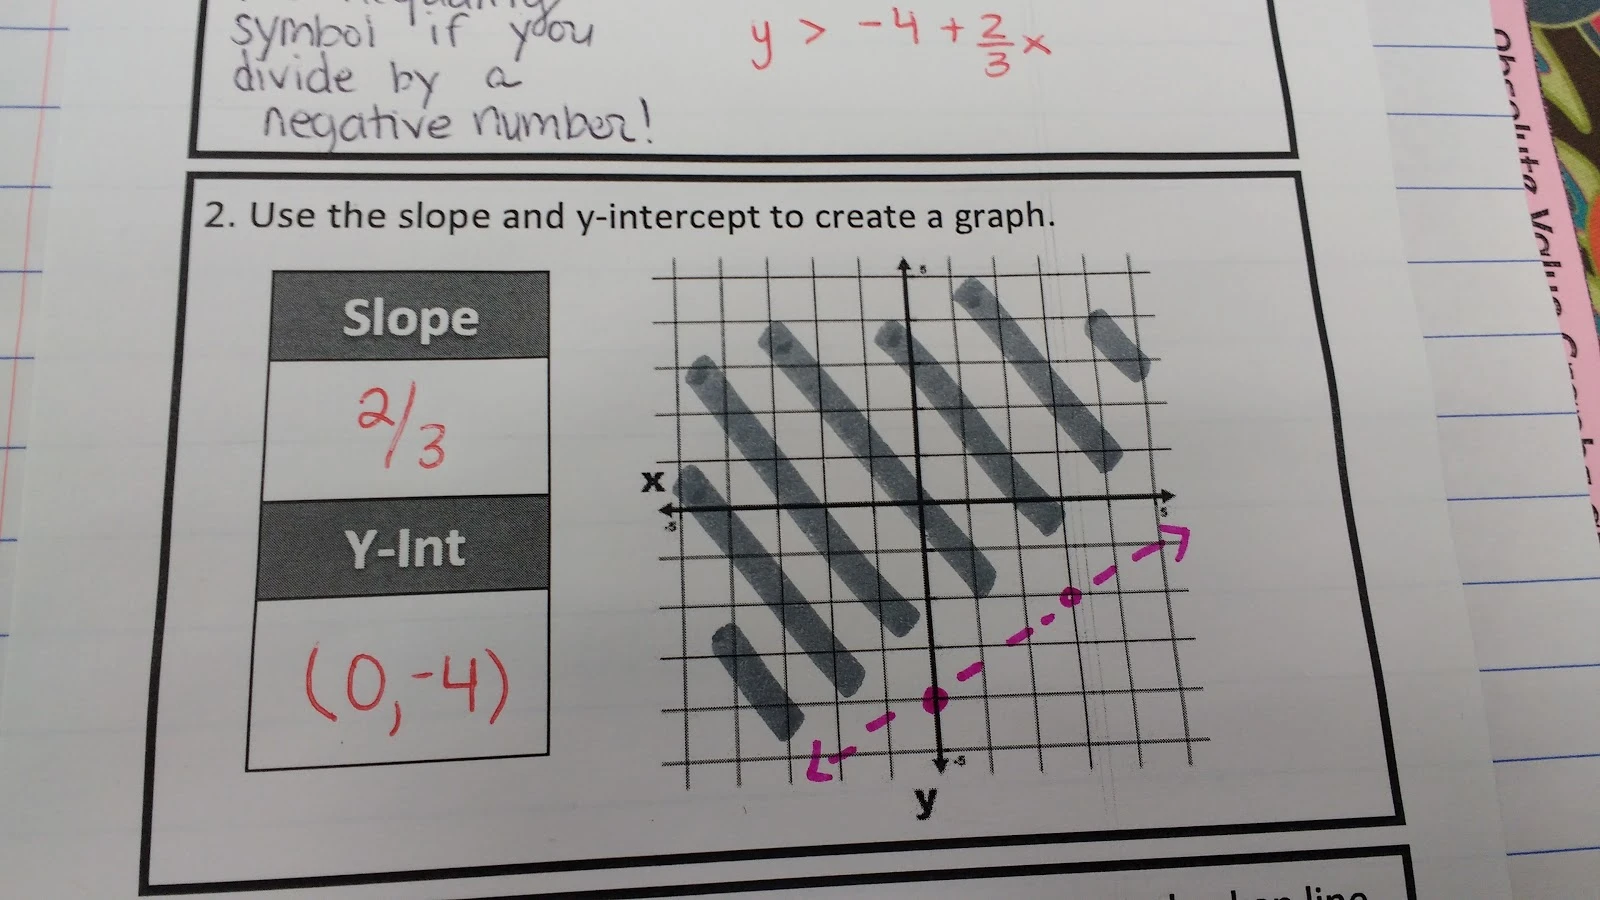 graphing linear inequalities graphic organizer in interactive notebook. 